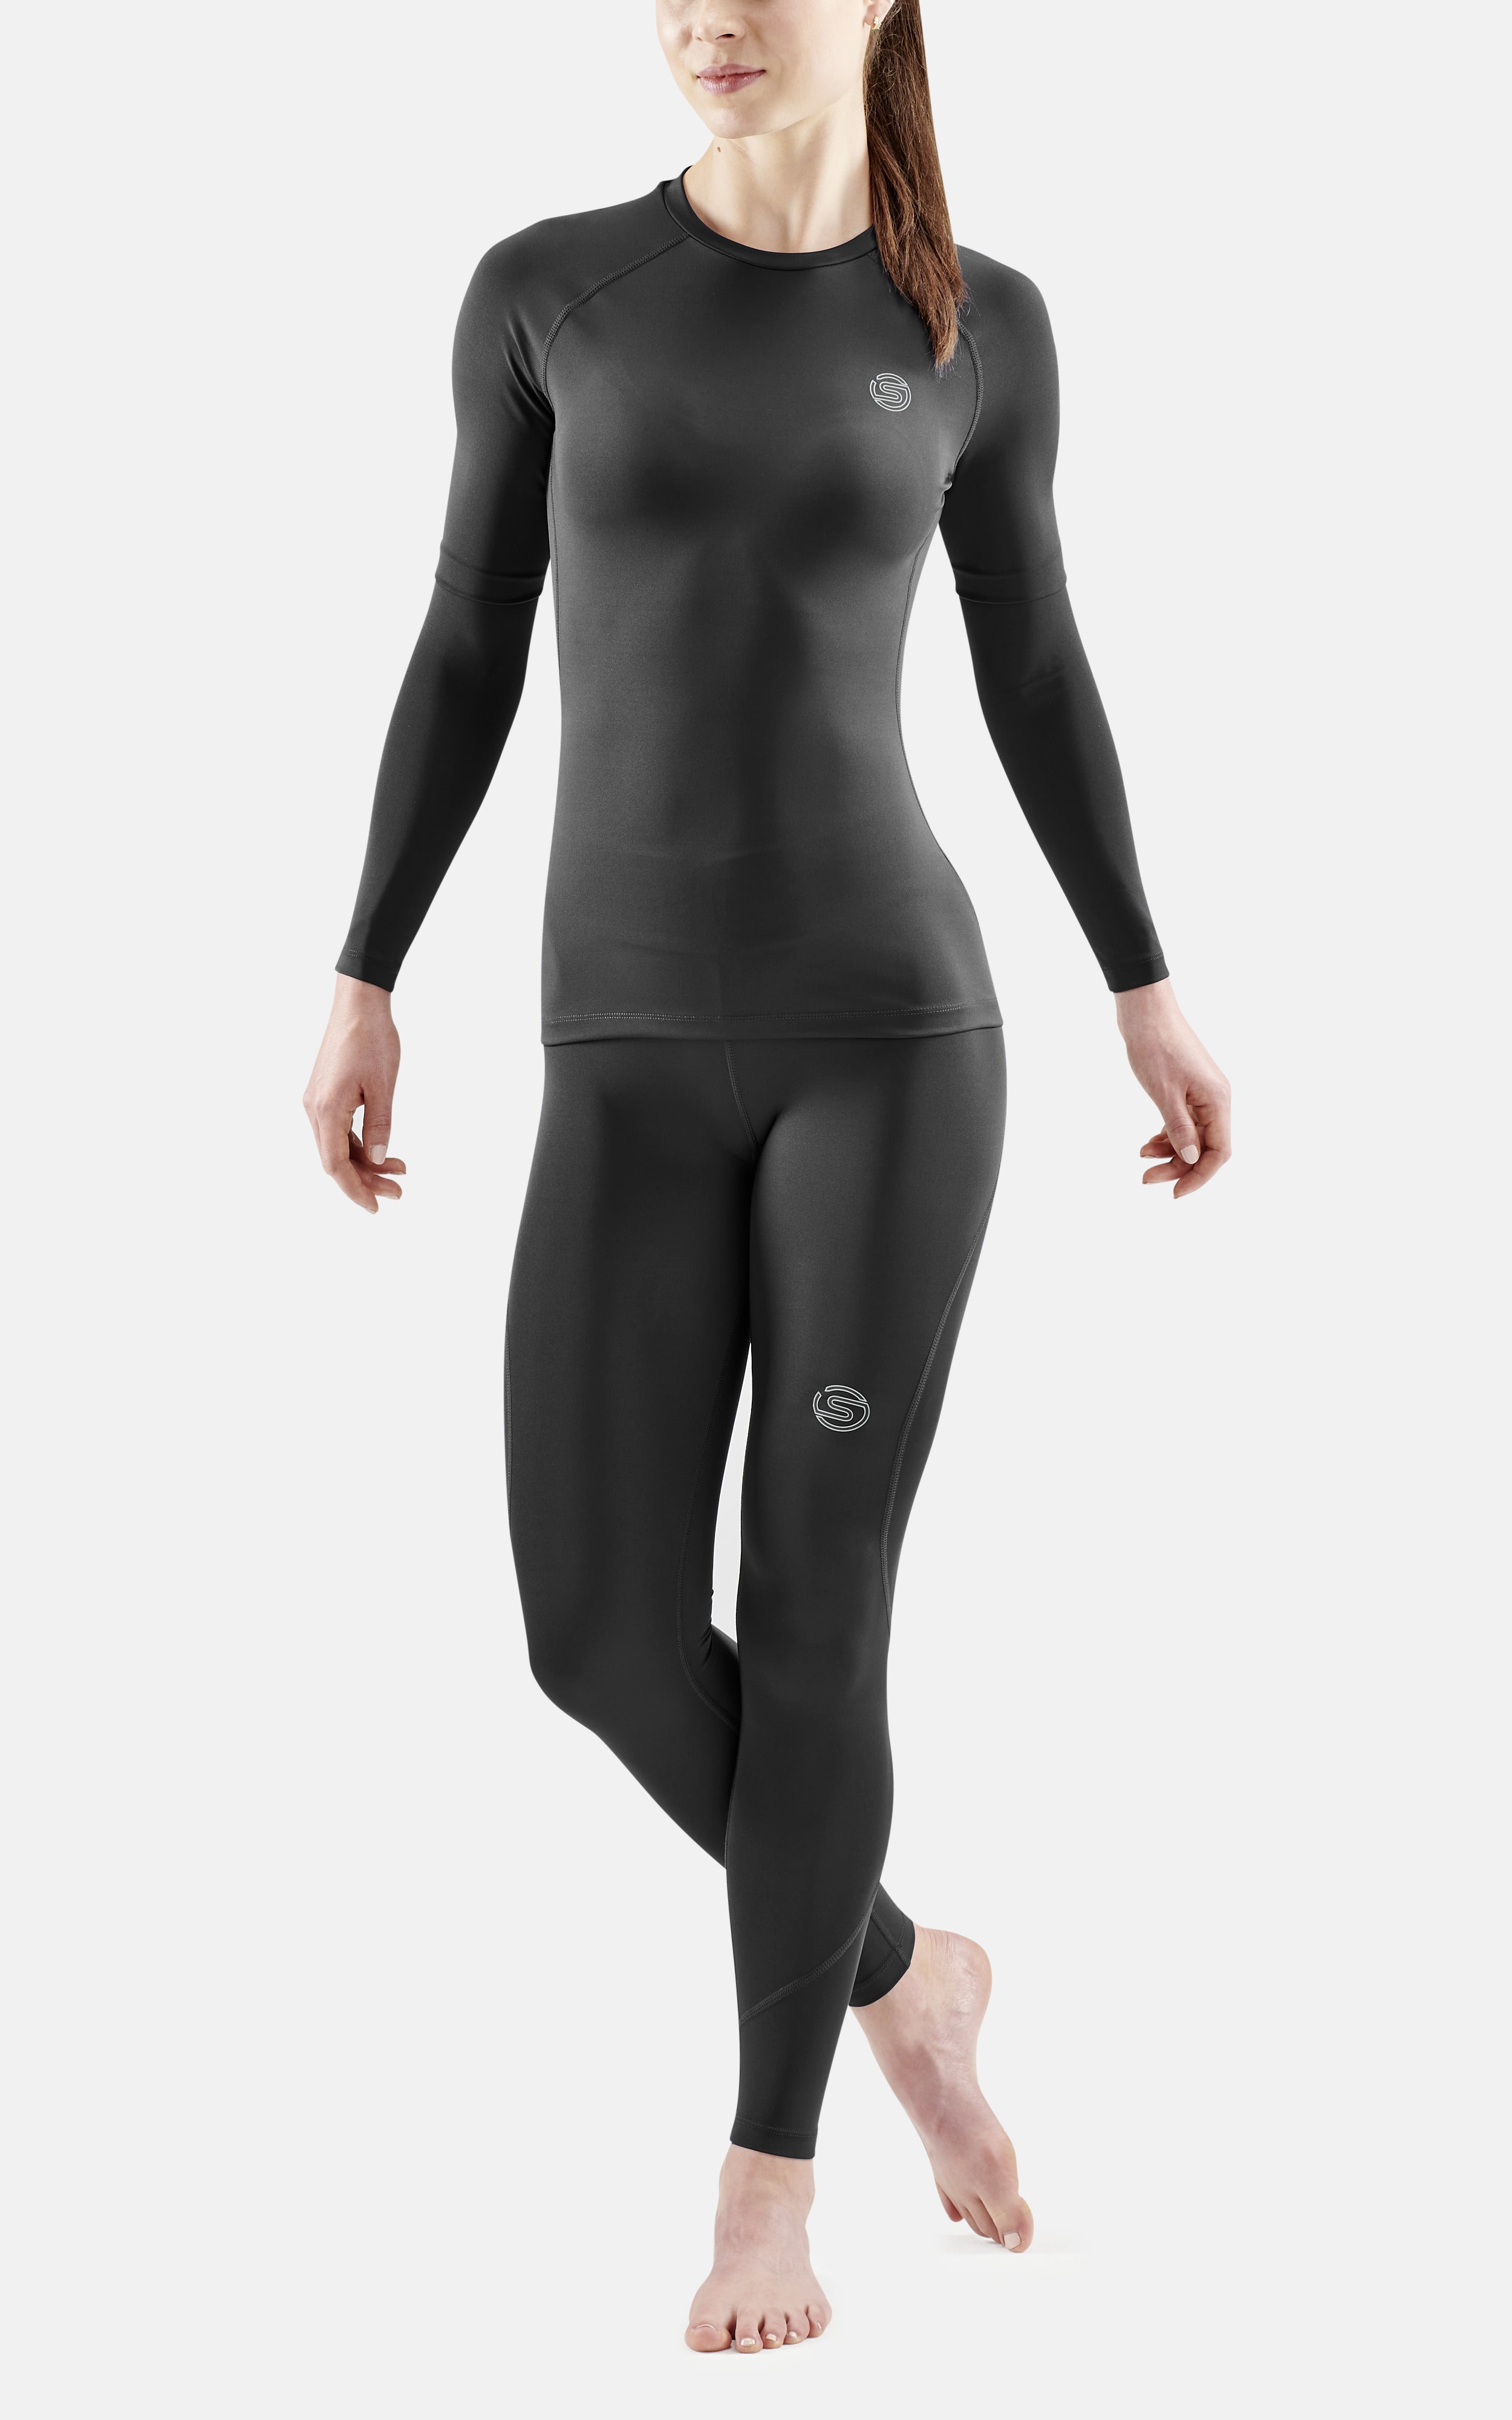 SKINS™ Compression on X: SKINS™ YOUTH NOW AVAILABLE IN NORTH